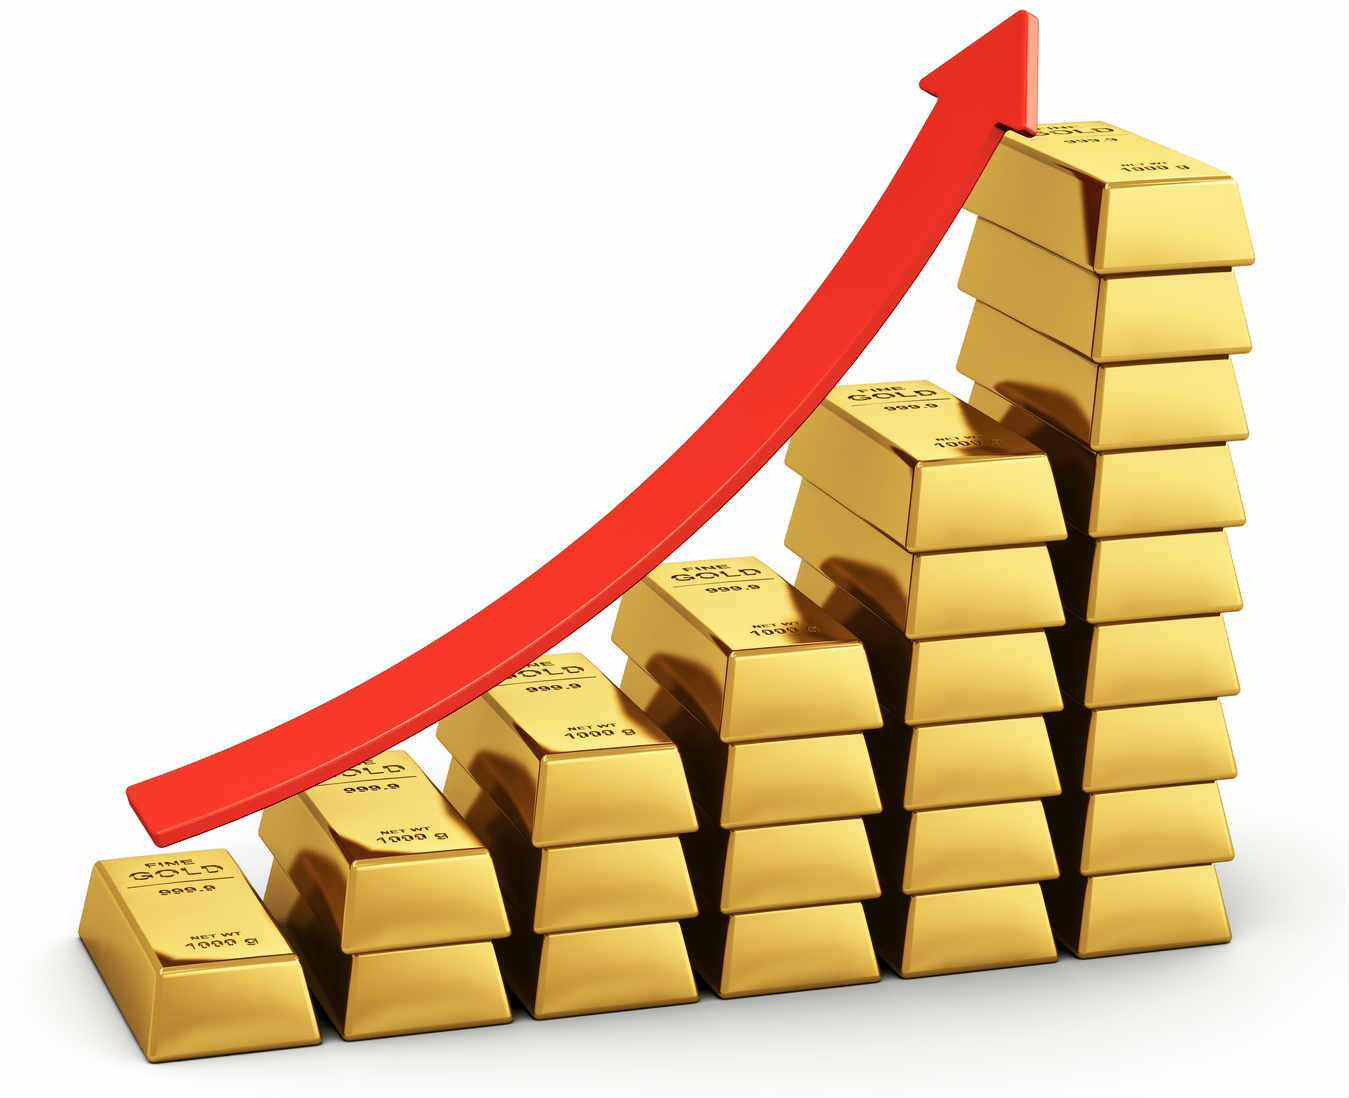 Price of gold increased again, such is the new price